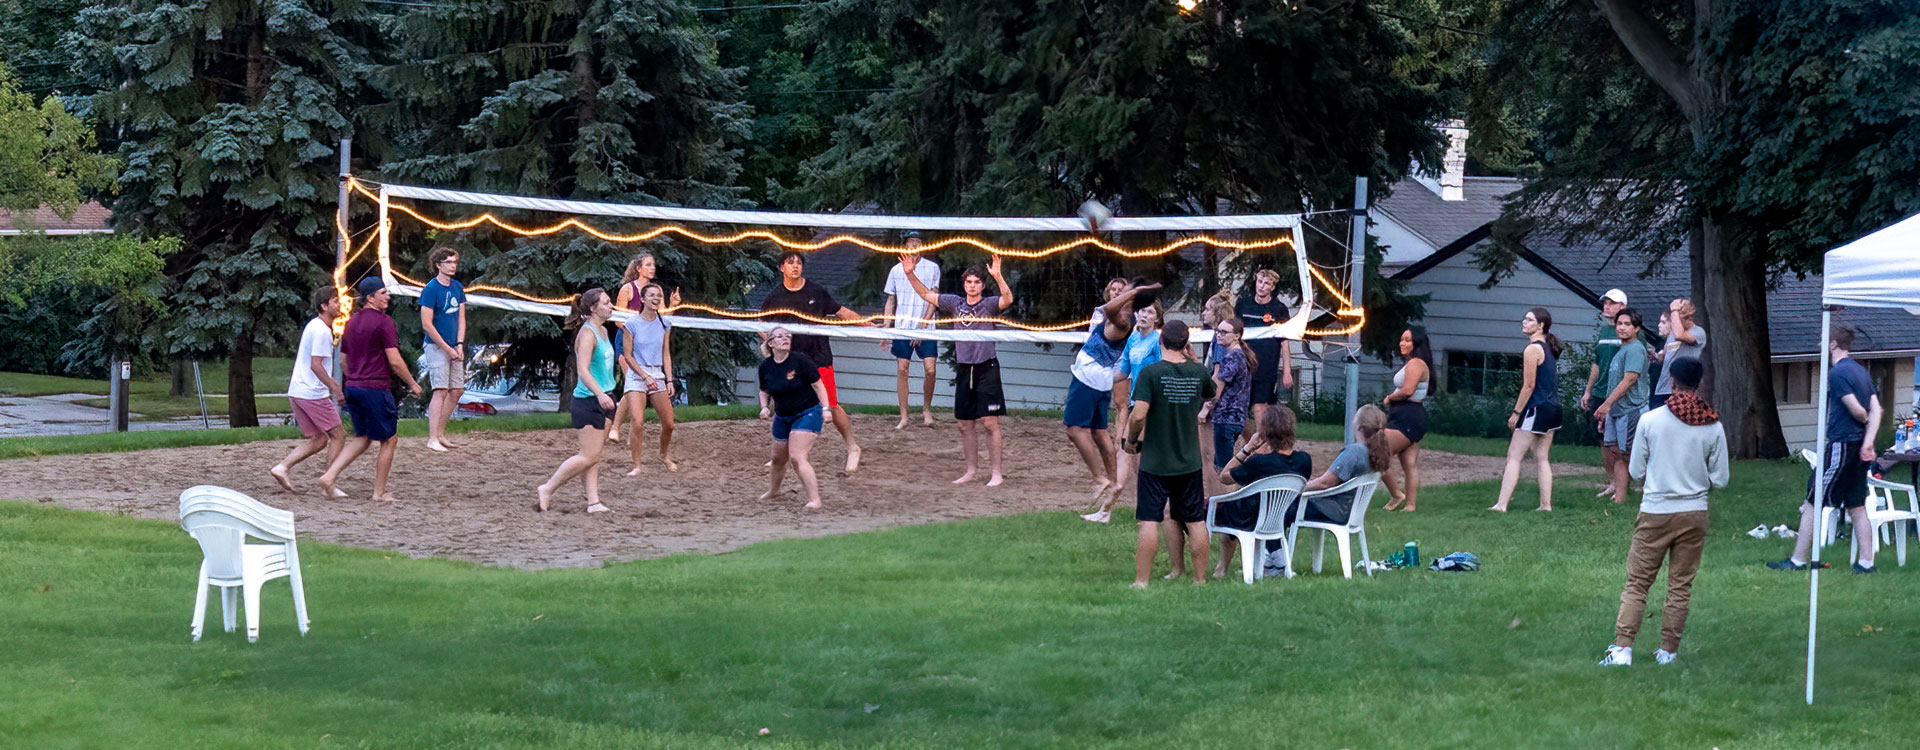 Students playing sand volleyball on WLC campus